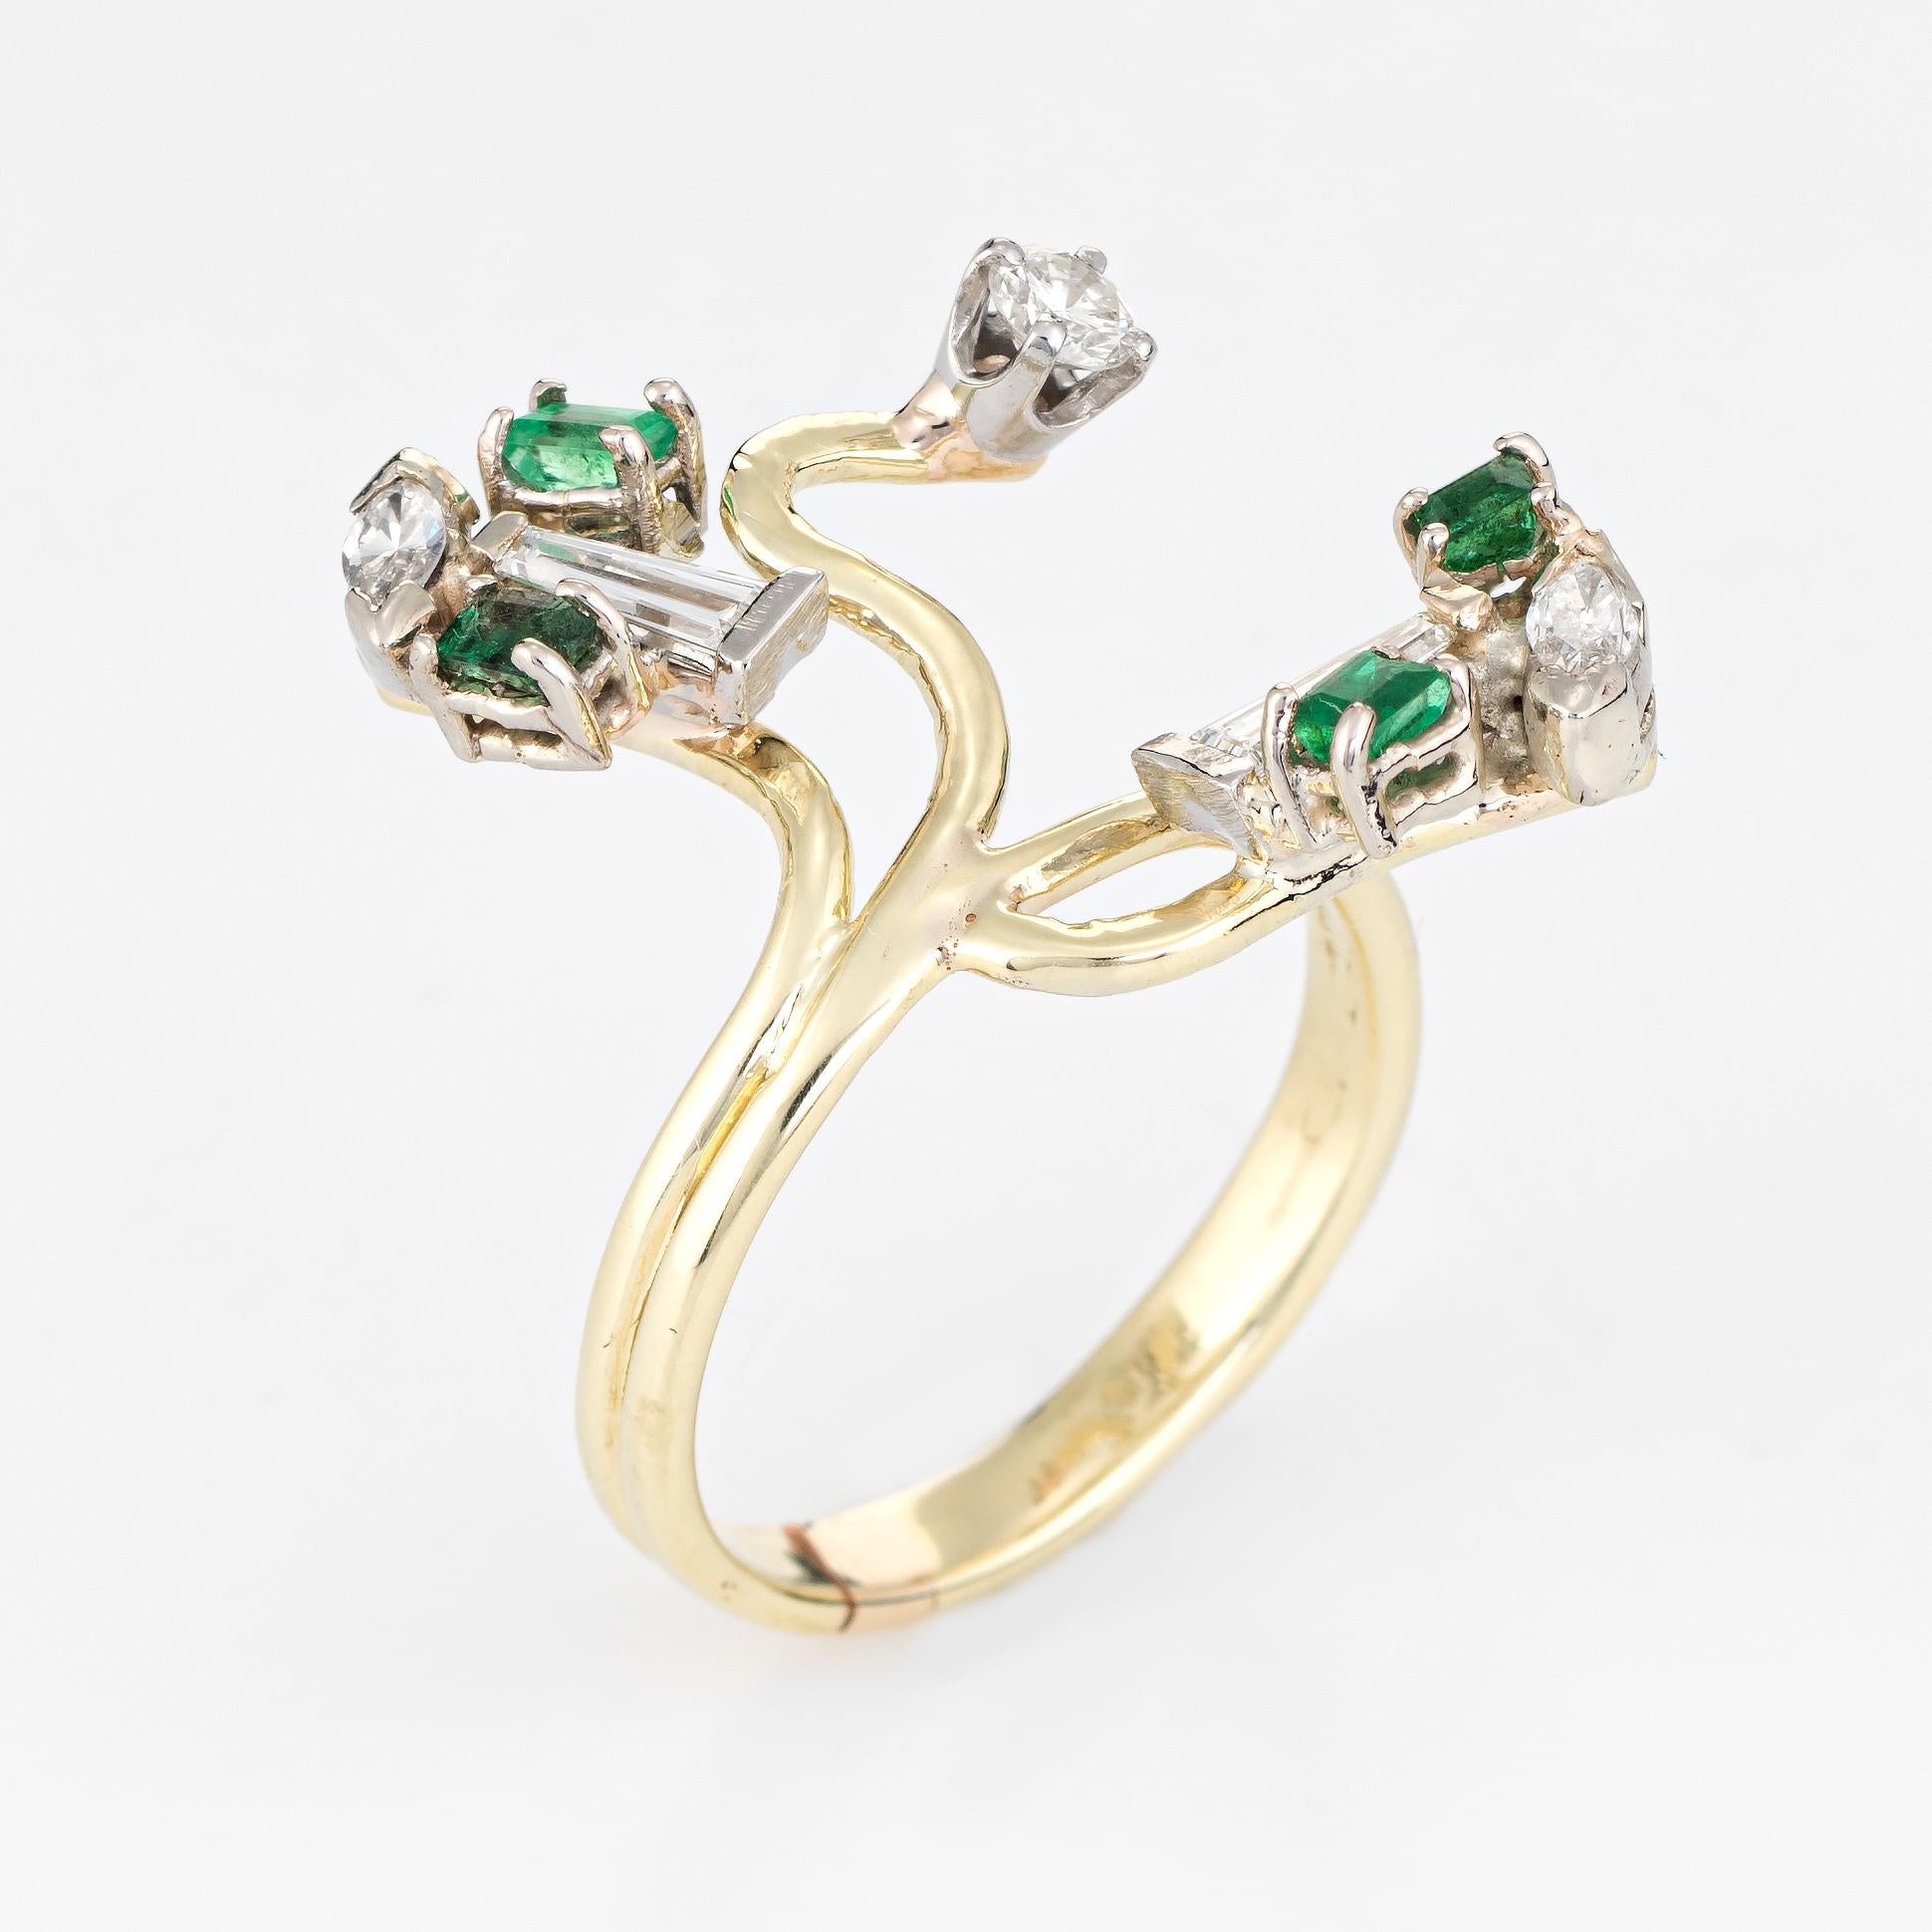 Finely detailed vintage emerald & diamond cocktail ring (circa 1960s to 1970s), crafted in 14 karat yellow gold. 

Mixed cut diamonds (baguette, marquise and round) total an estimated 0.60 carats (estimated at H-I color and VS2-SI2 clarity). The